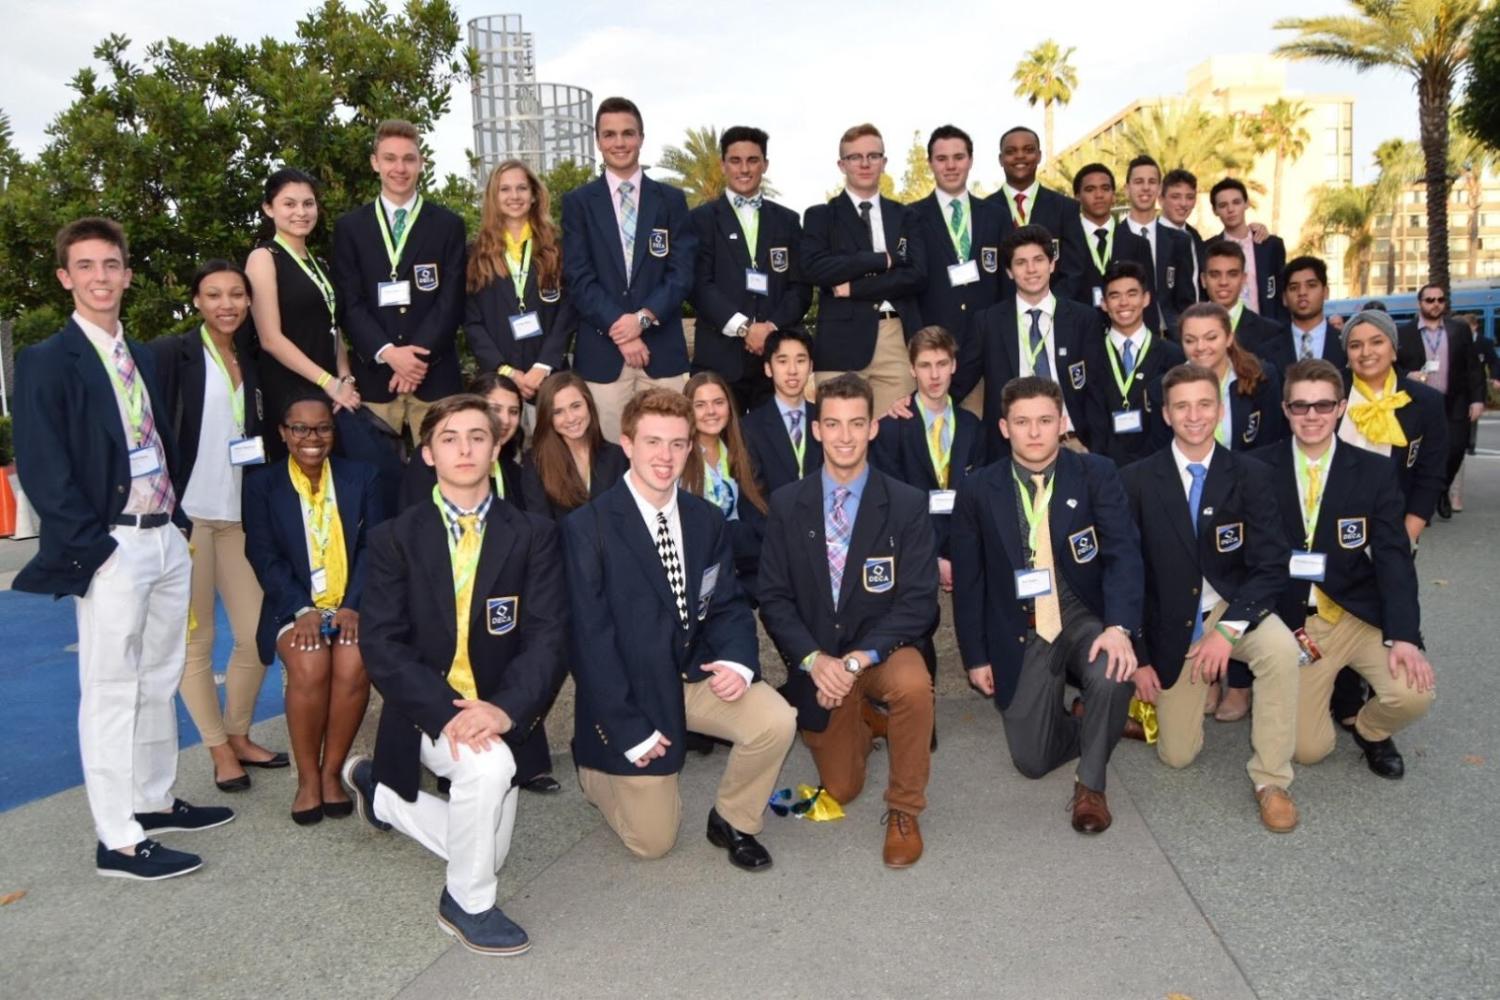 West Bloomfield High School DECA Chapter Earns Highest Honors at DECA International Career Development Conference